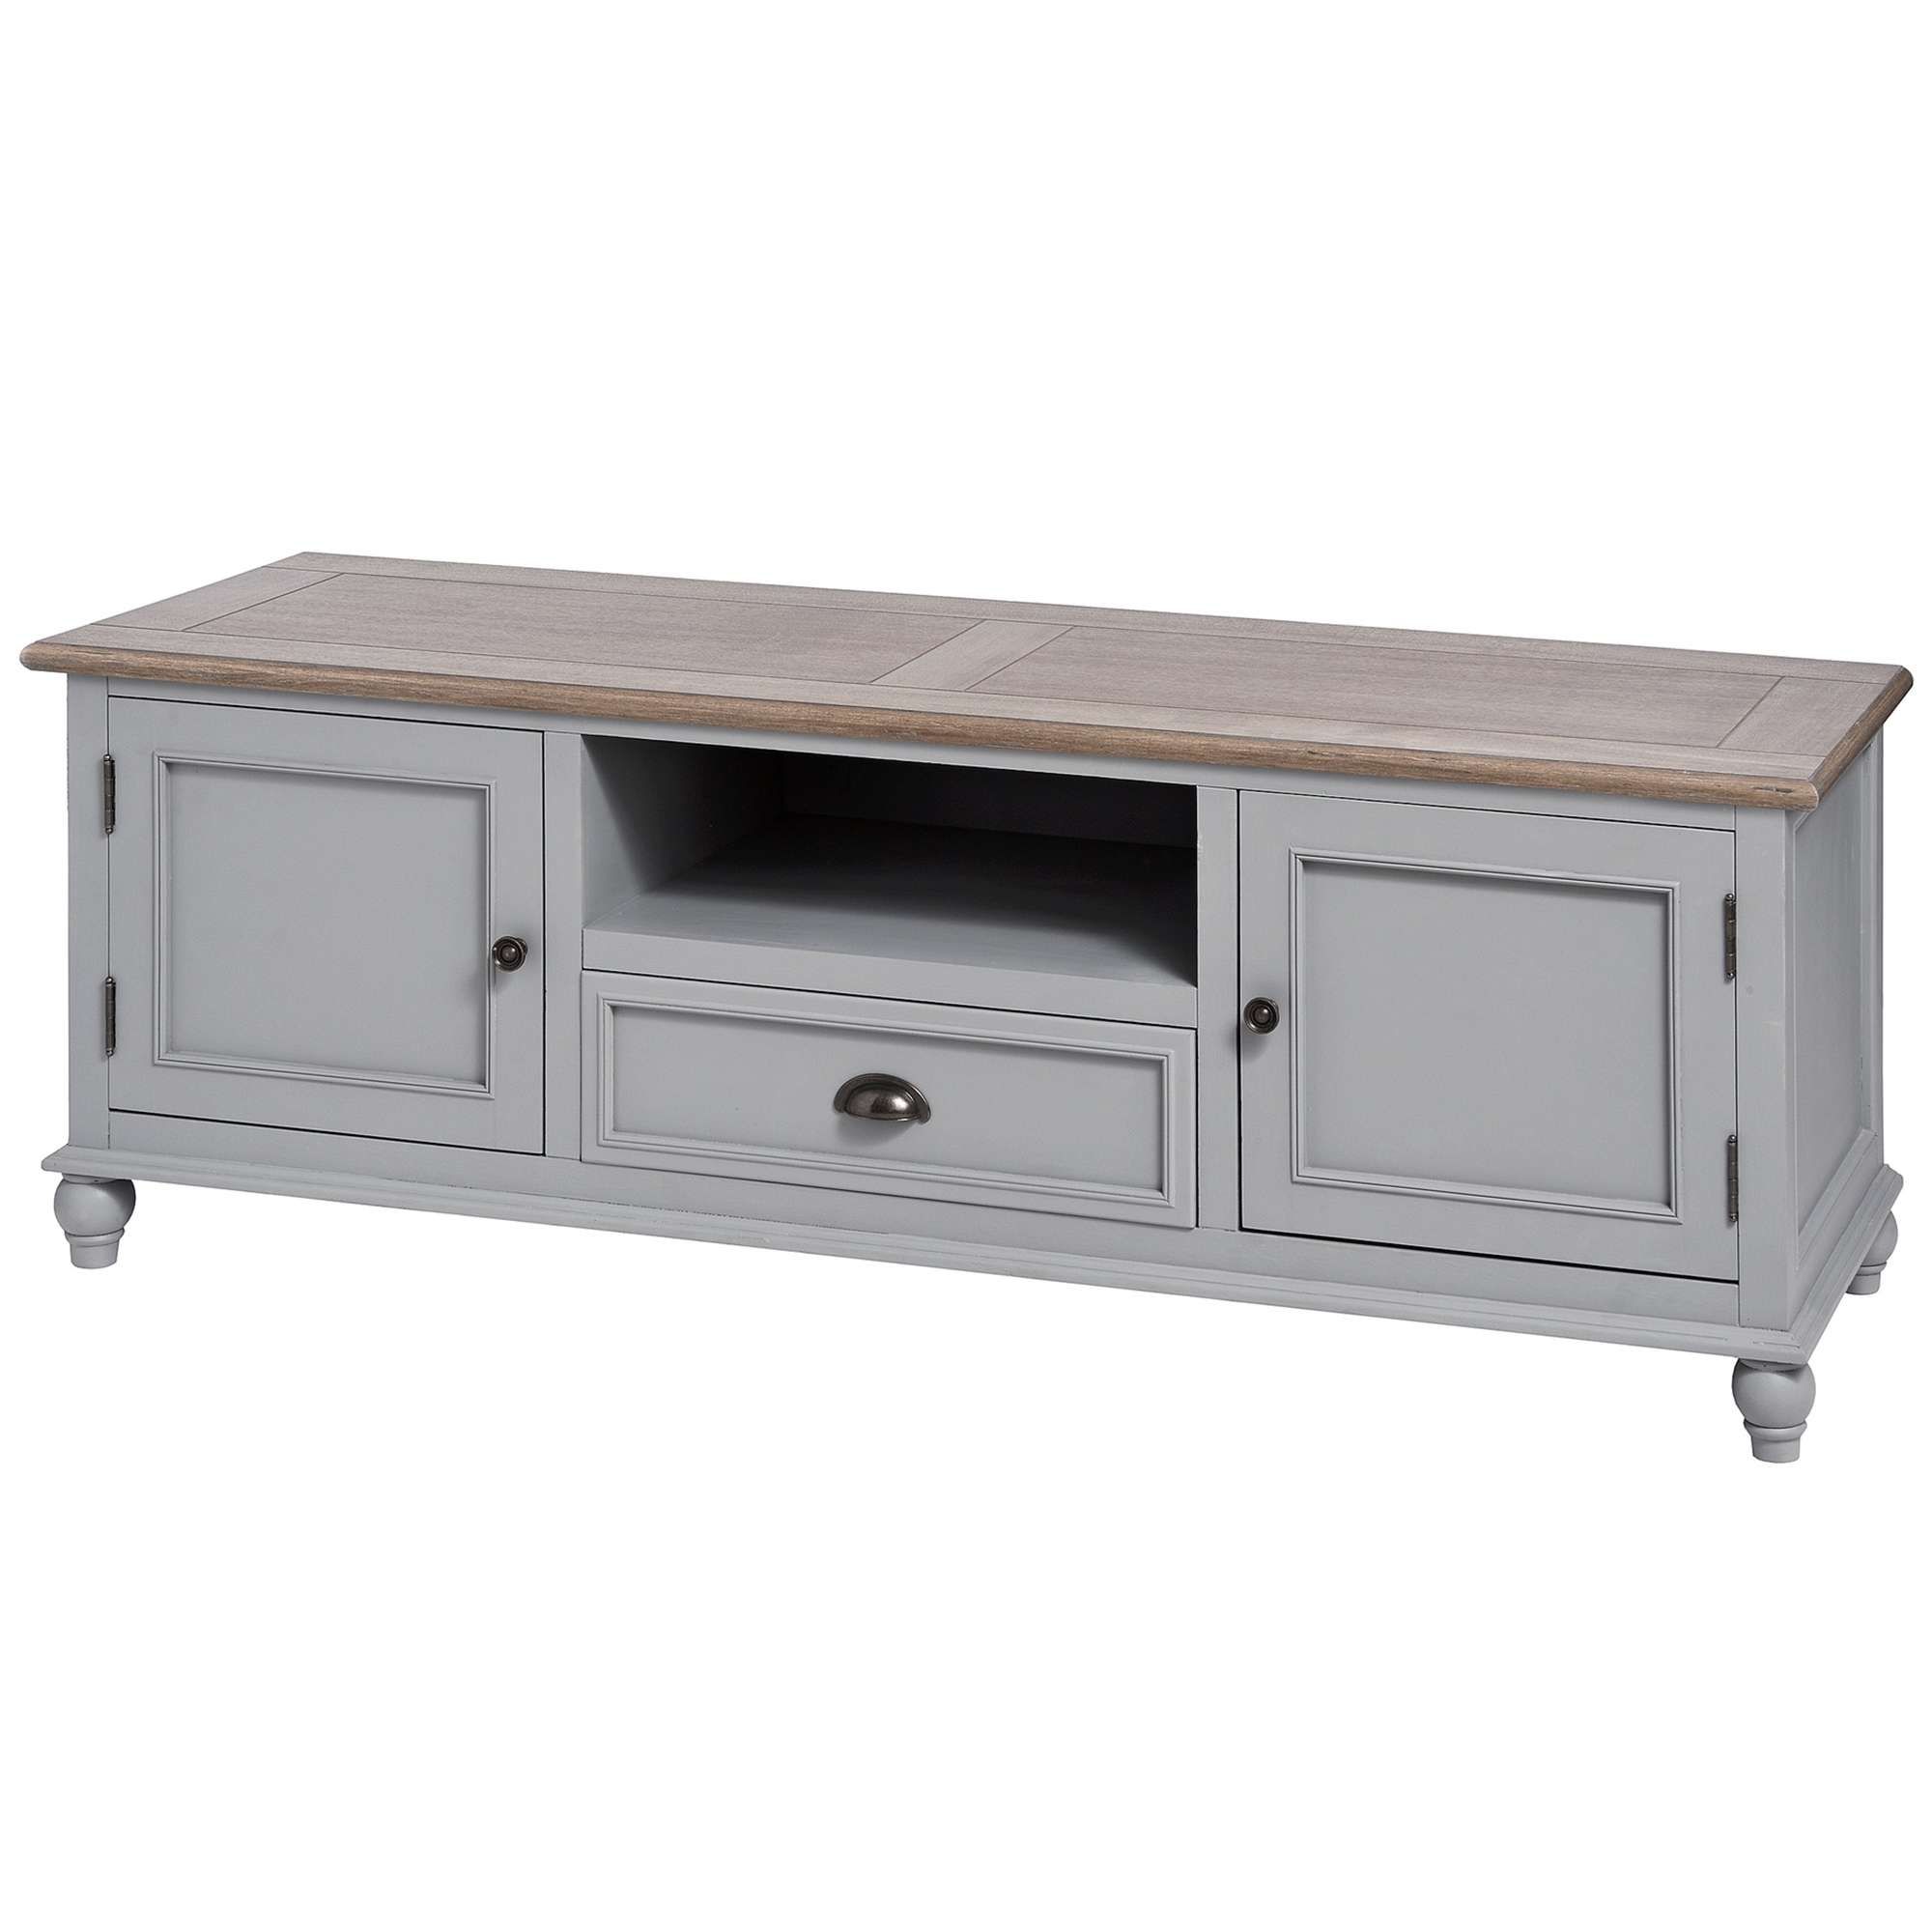 Churchill Shabby Chic Tv Cabinet | Available Now In Shabby Chic Tv Cabinets (View 1 of 20)